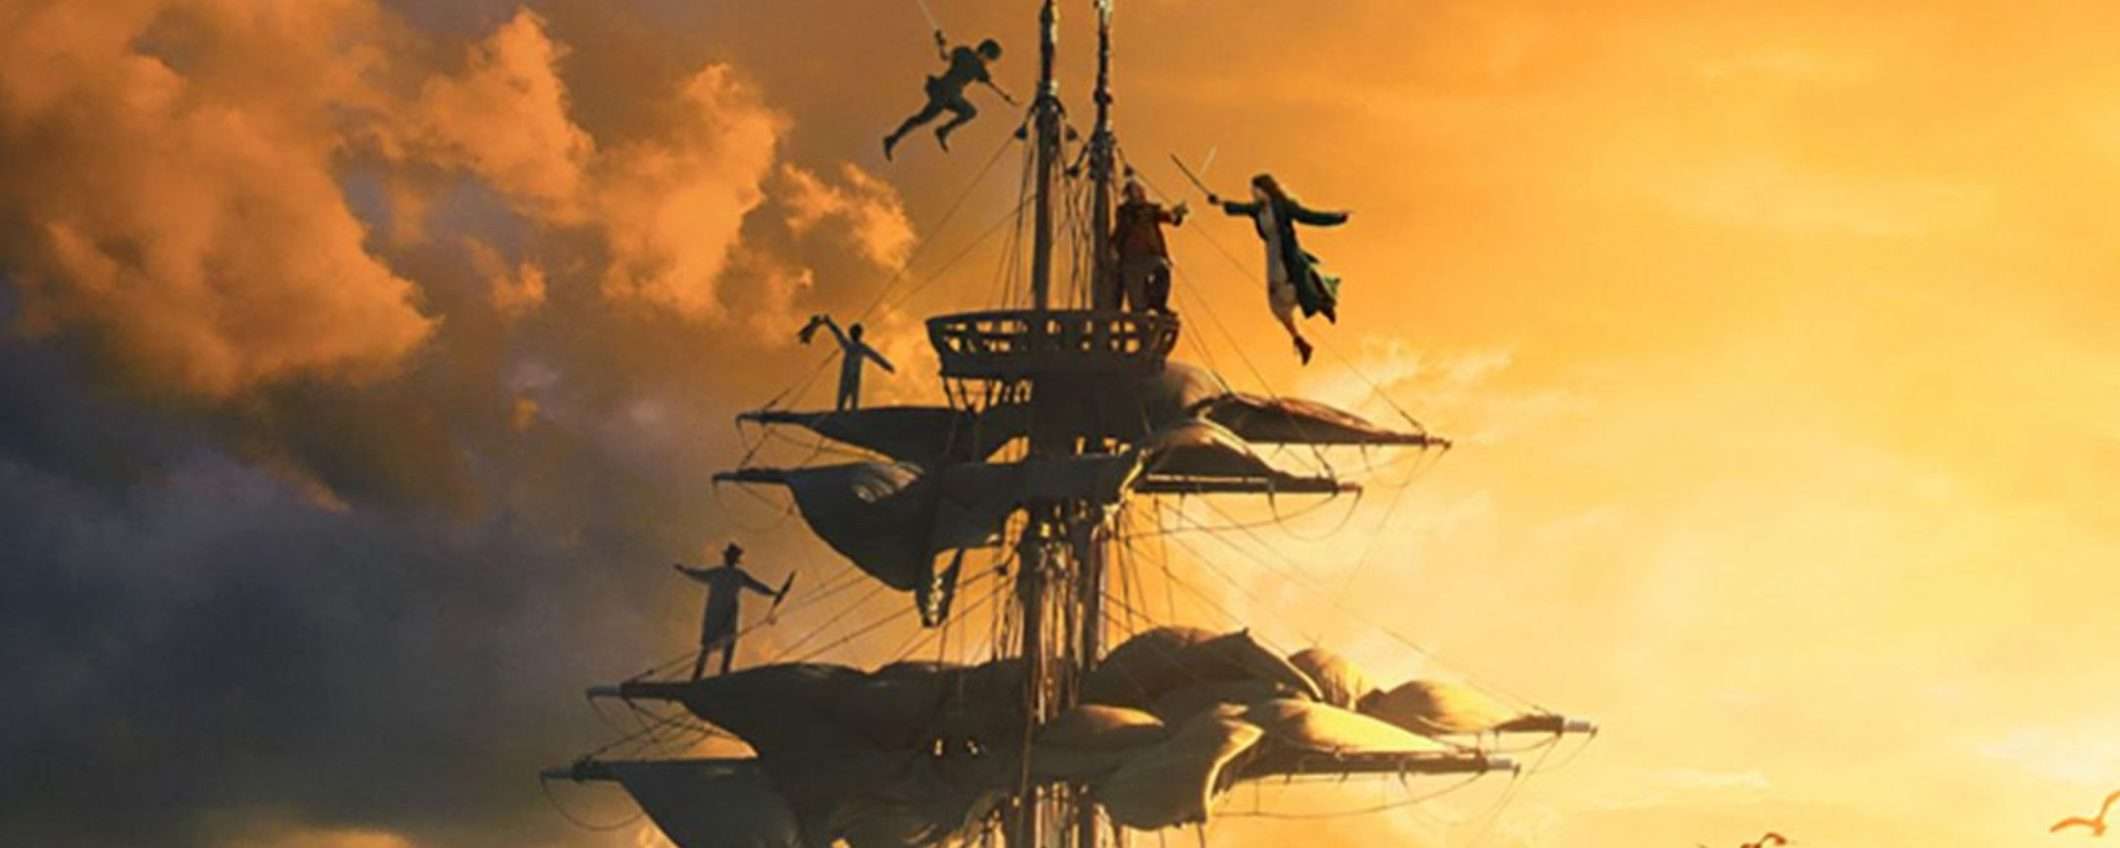 Peter Pan & Wendy: guarda il nuovo film Disney in streaming